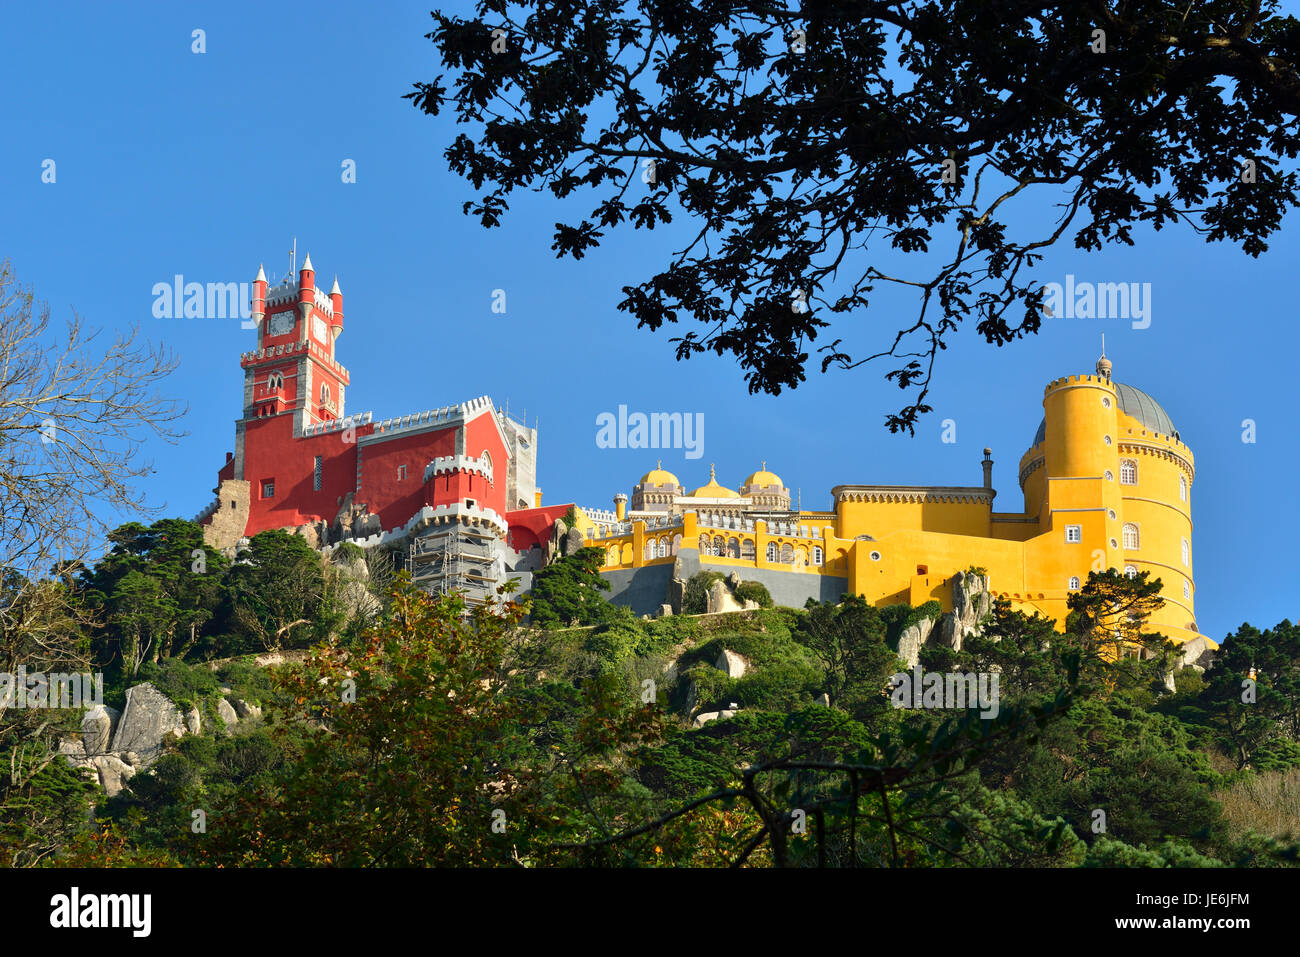 Palacio da Pena, built in the 19th century, in the hills above Sintra, in the middle of a UNESCO World Heritage Site. Sintra, Portugal Stock Photo